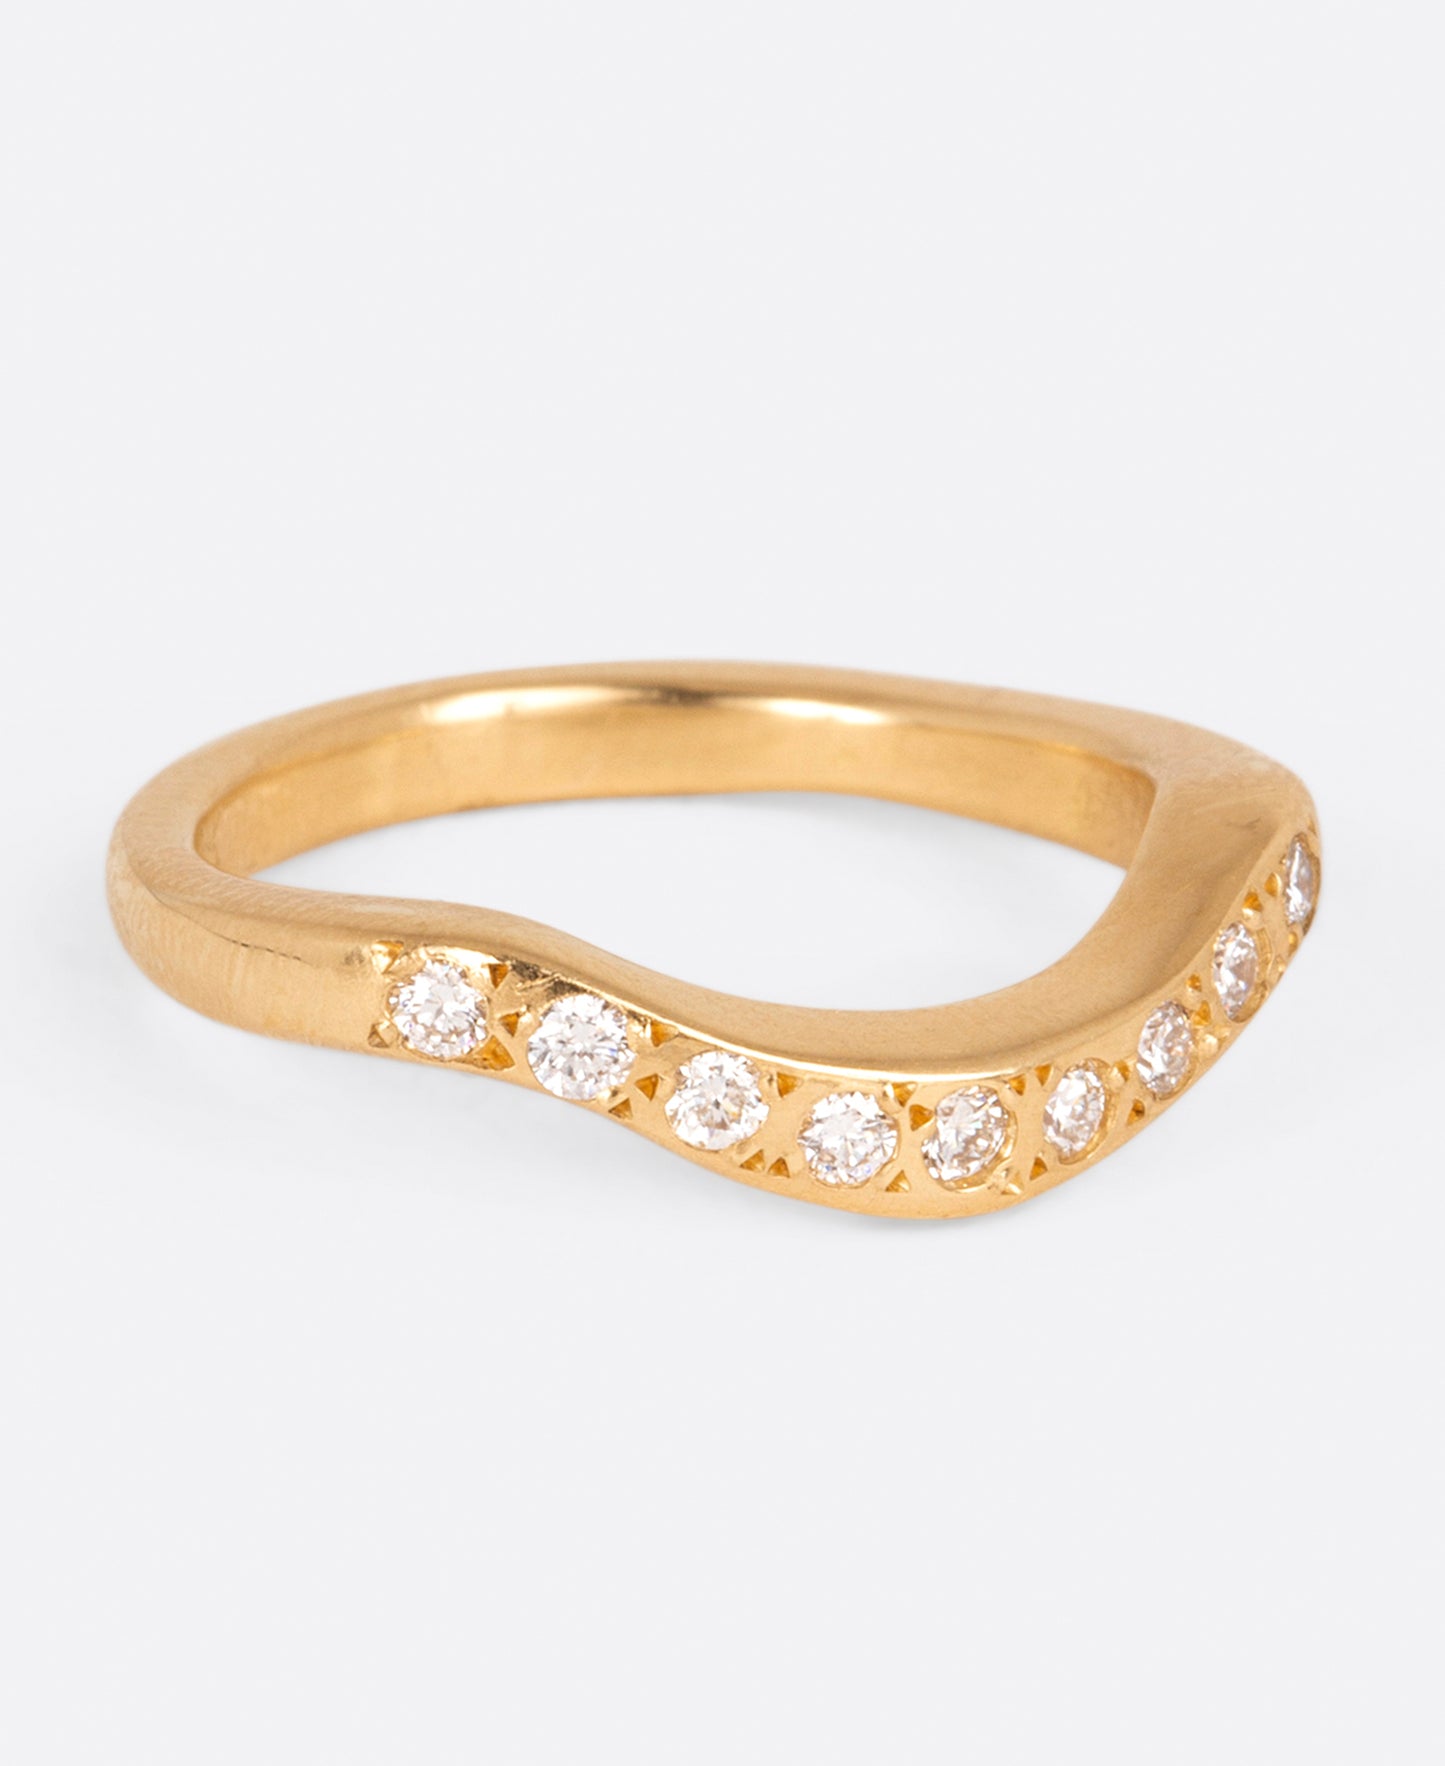 A curved yellow gold band with nine round white diamonds, shown from the side.